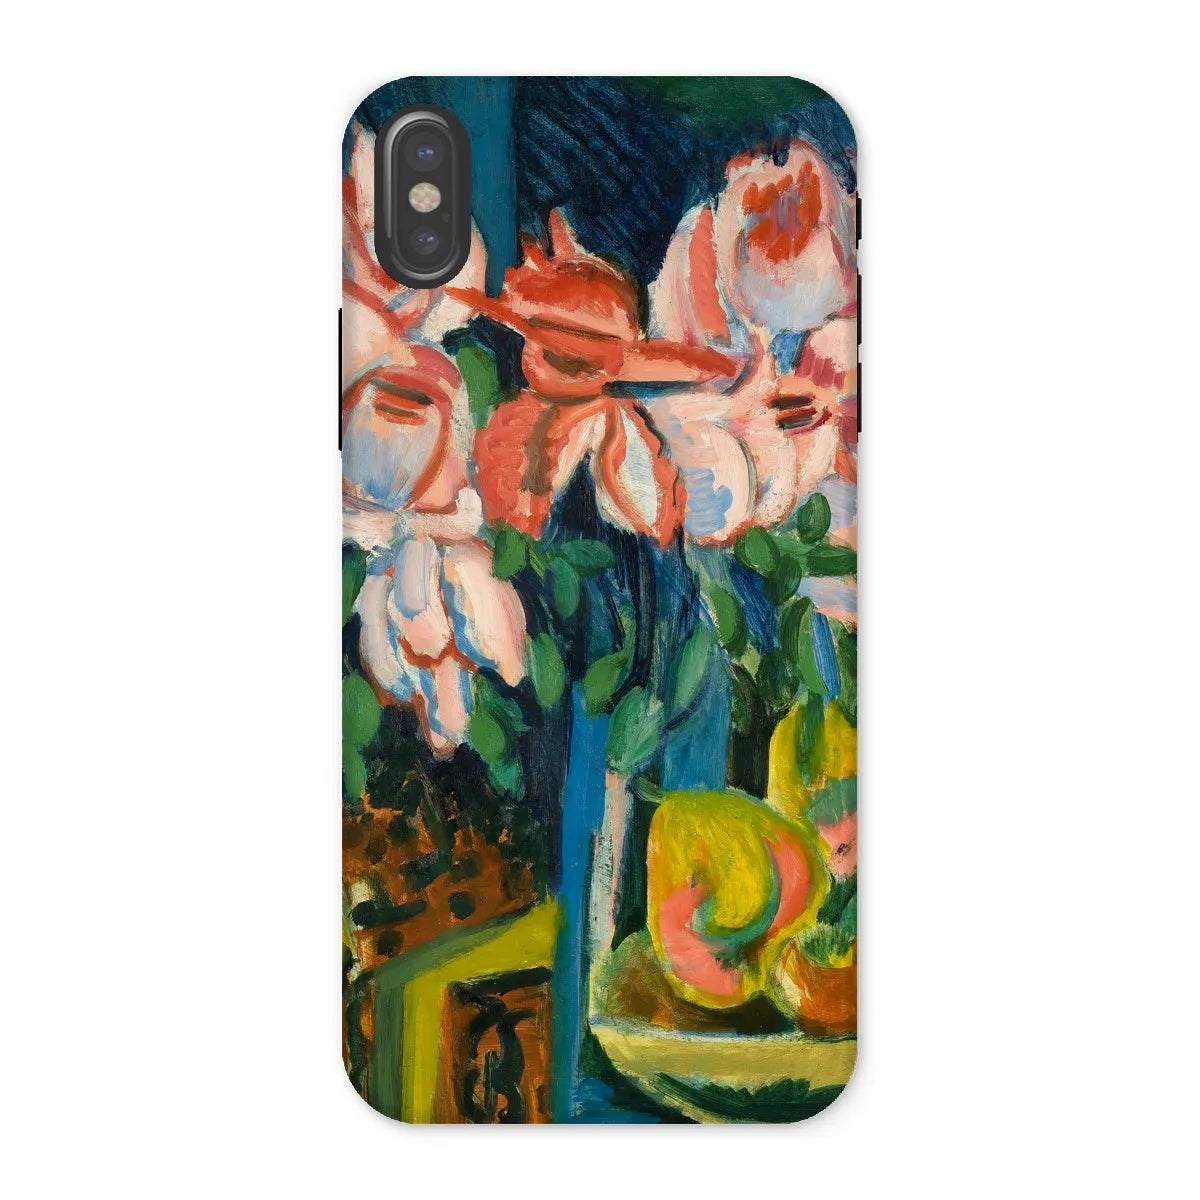 Pink Roses - Expressionist Phone Case - Ernst Ludwig Kirchner - Iphone x / Matte - Mobile Phone Cases - Aesthetic Art